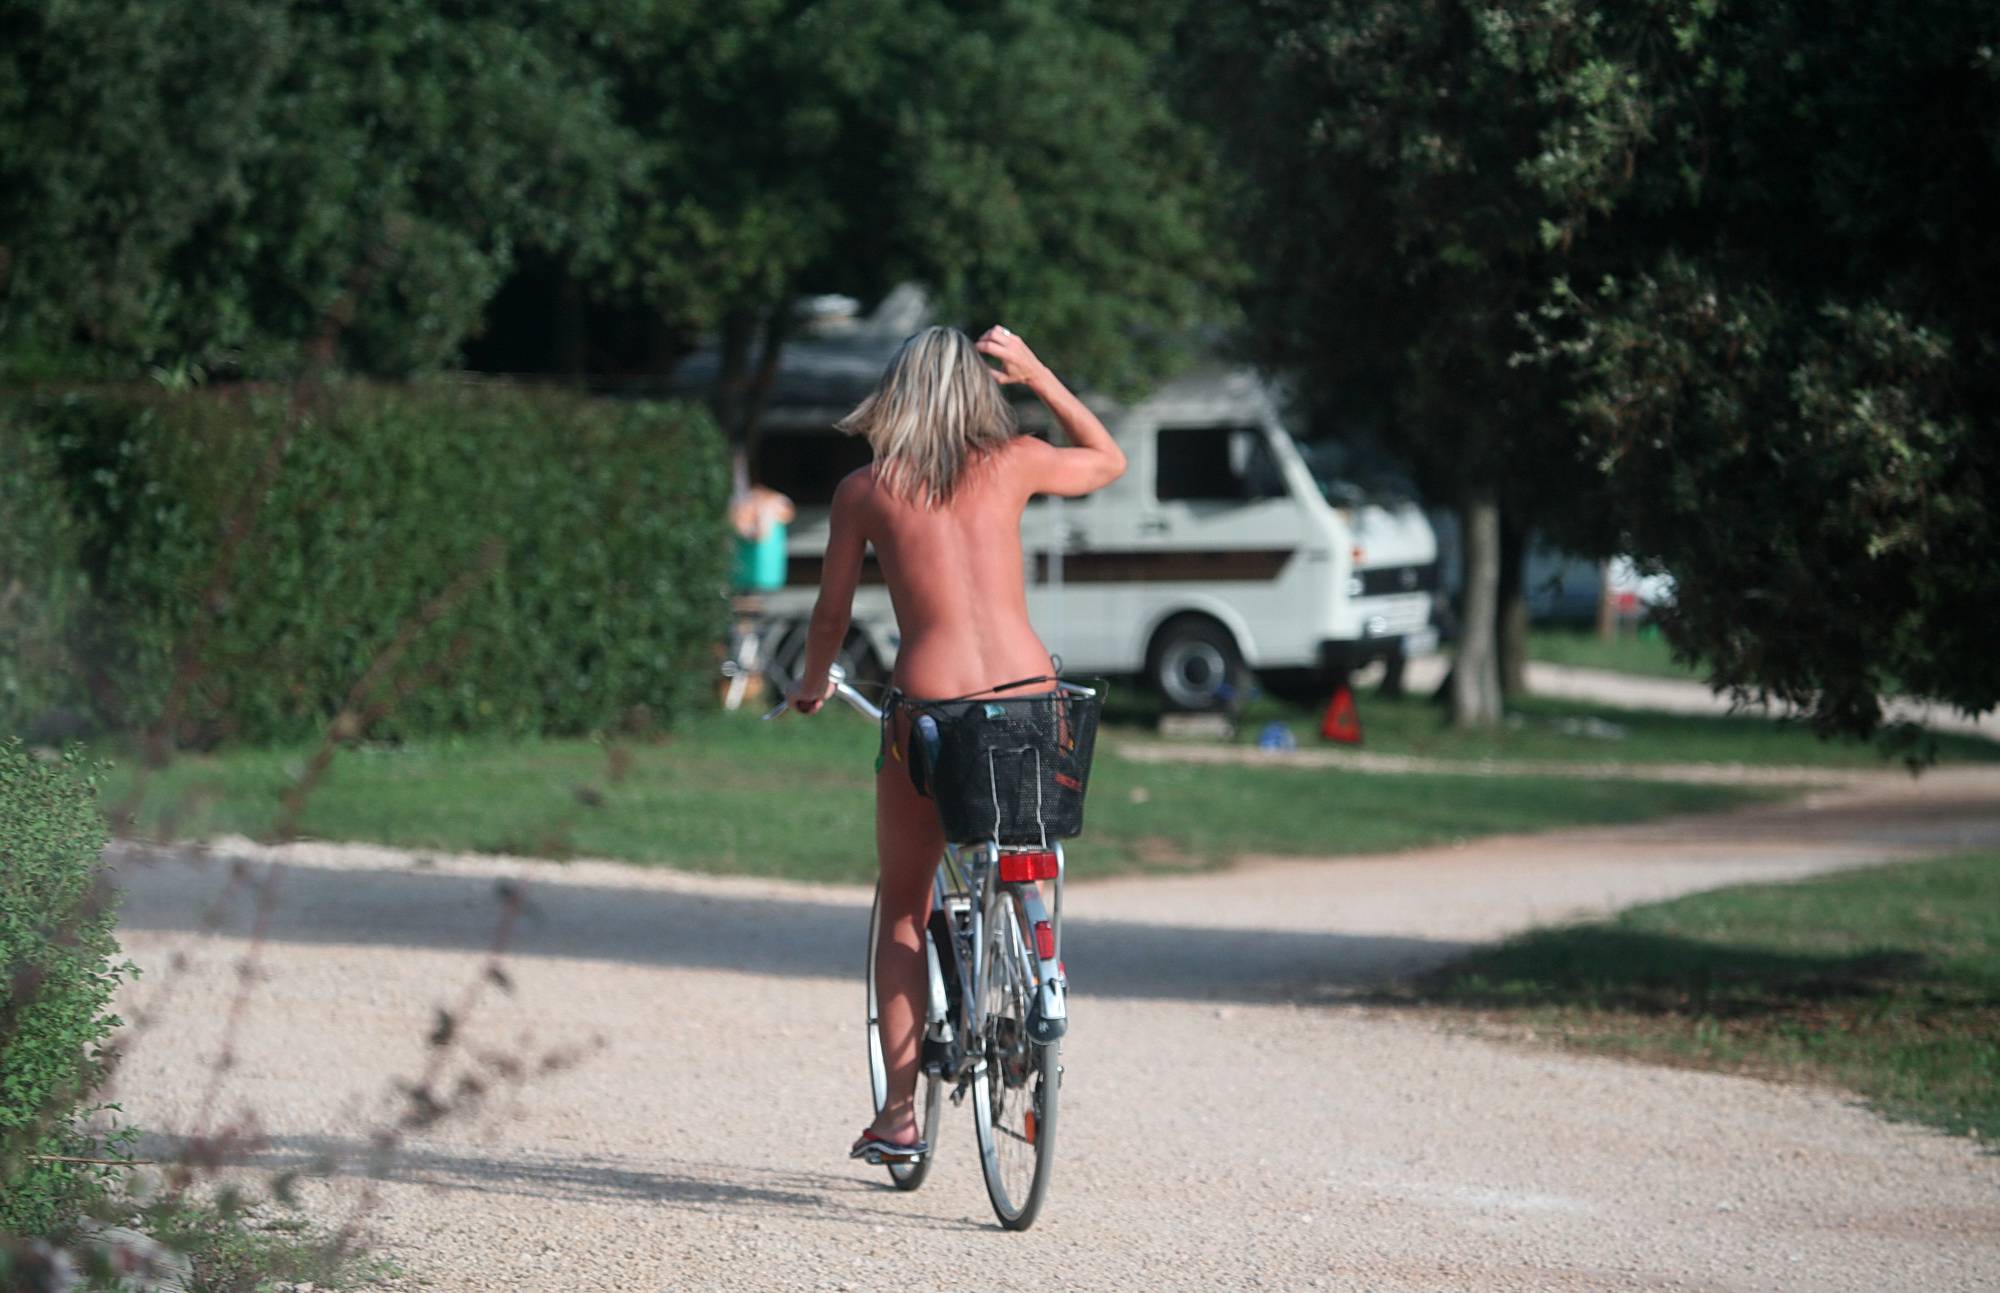 Pure Nudism Images-Tanned Biker Zooms Off - 2